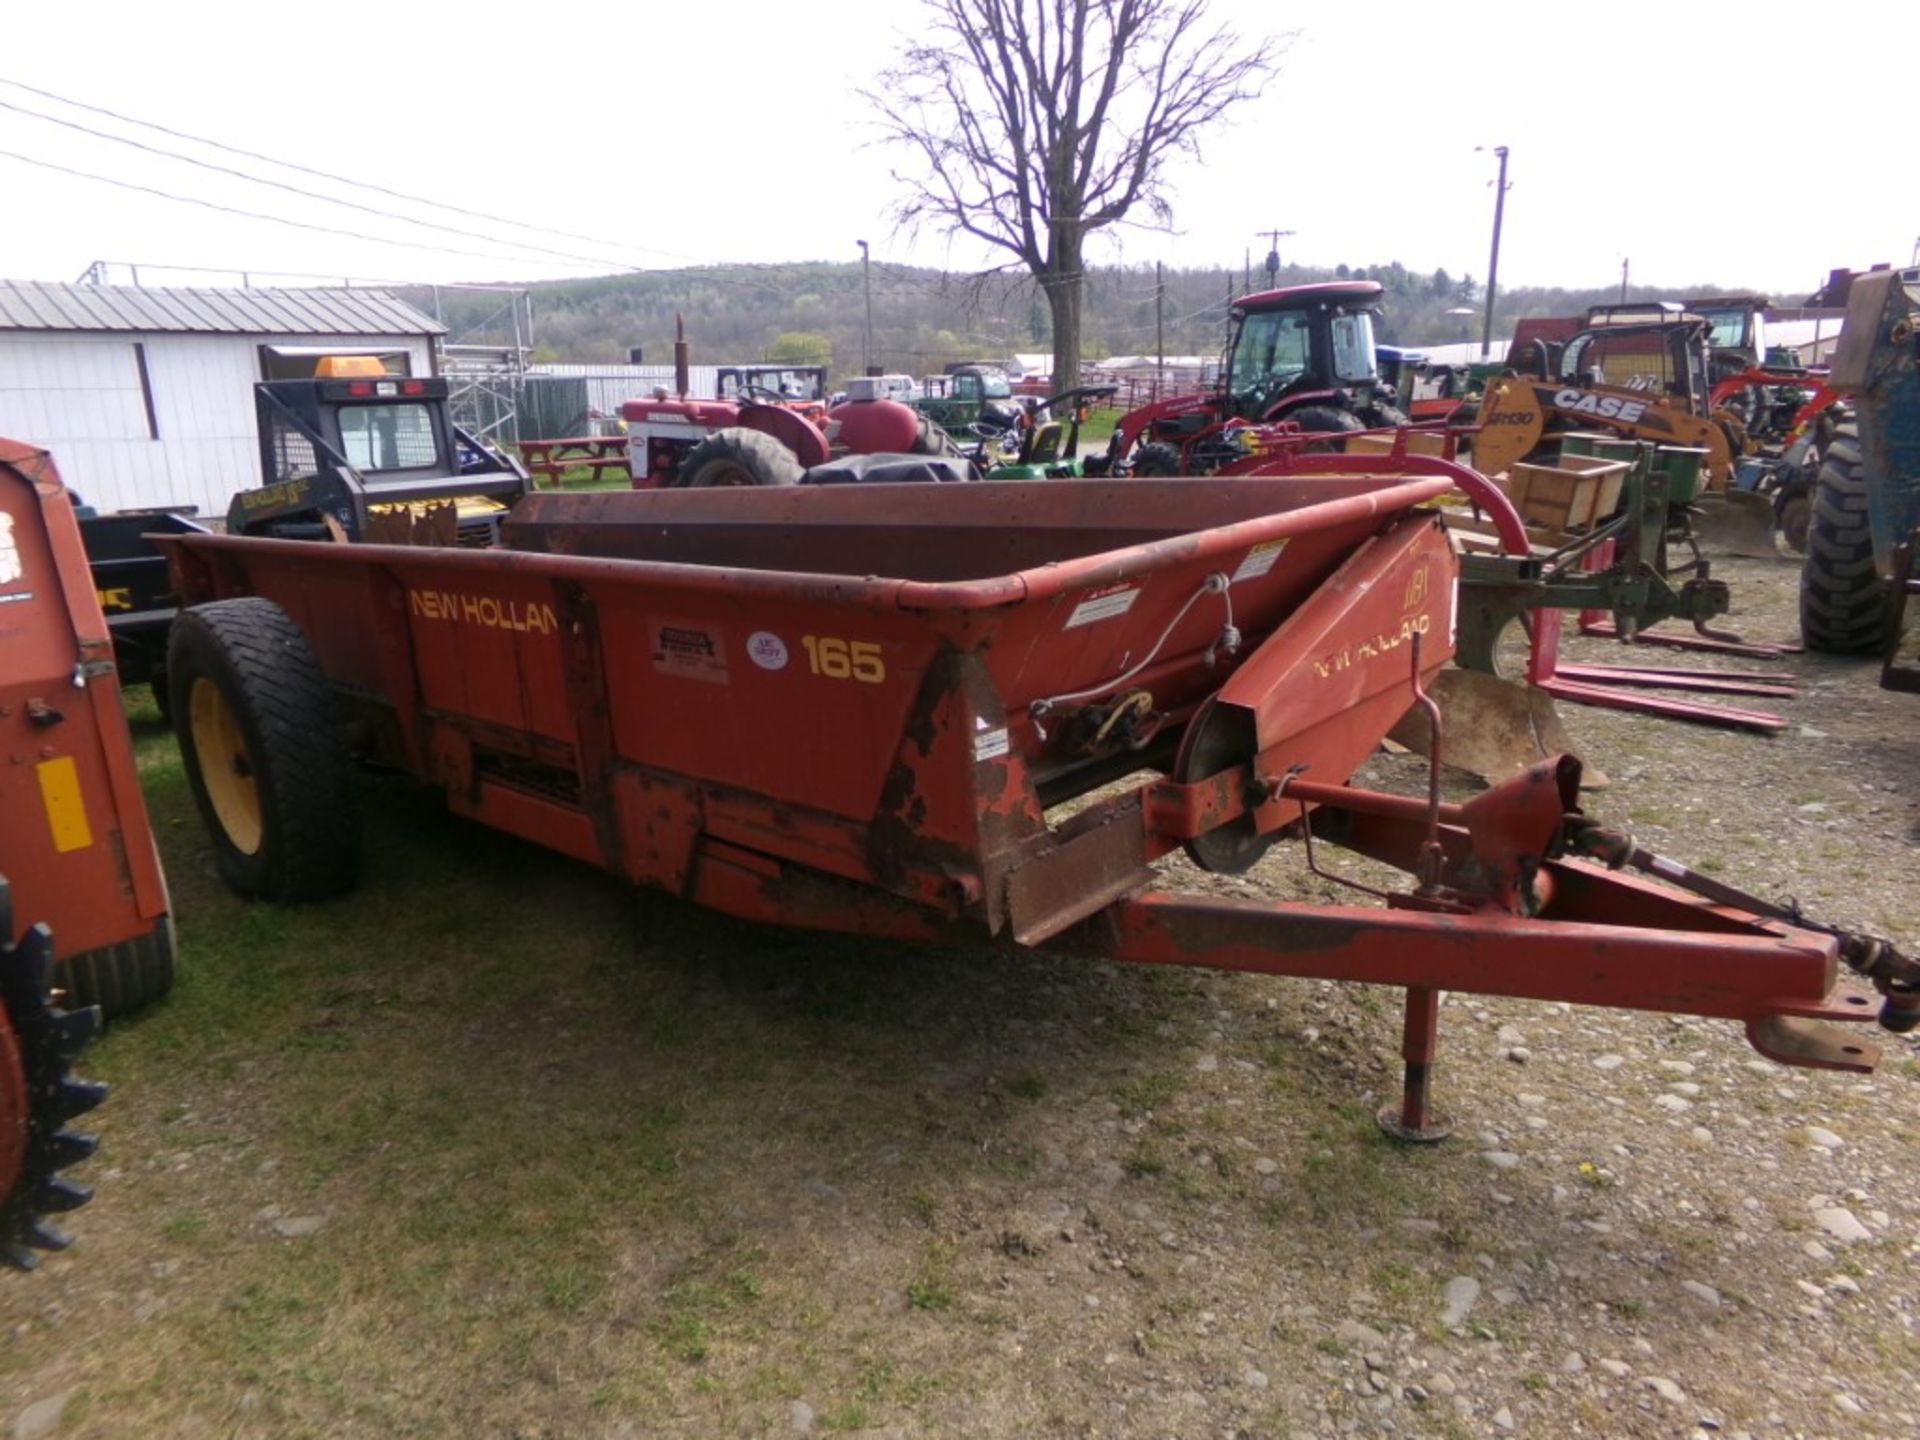 New Holland 165 Manure Spreader - Needs Chain Fixed (4391) - Image 2 of 3